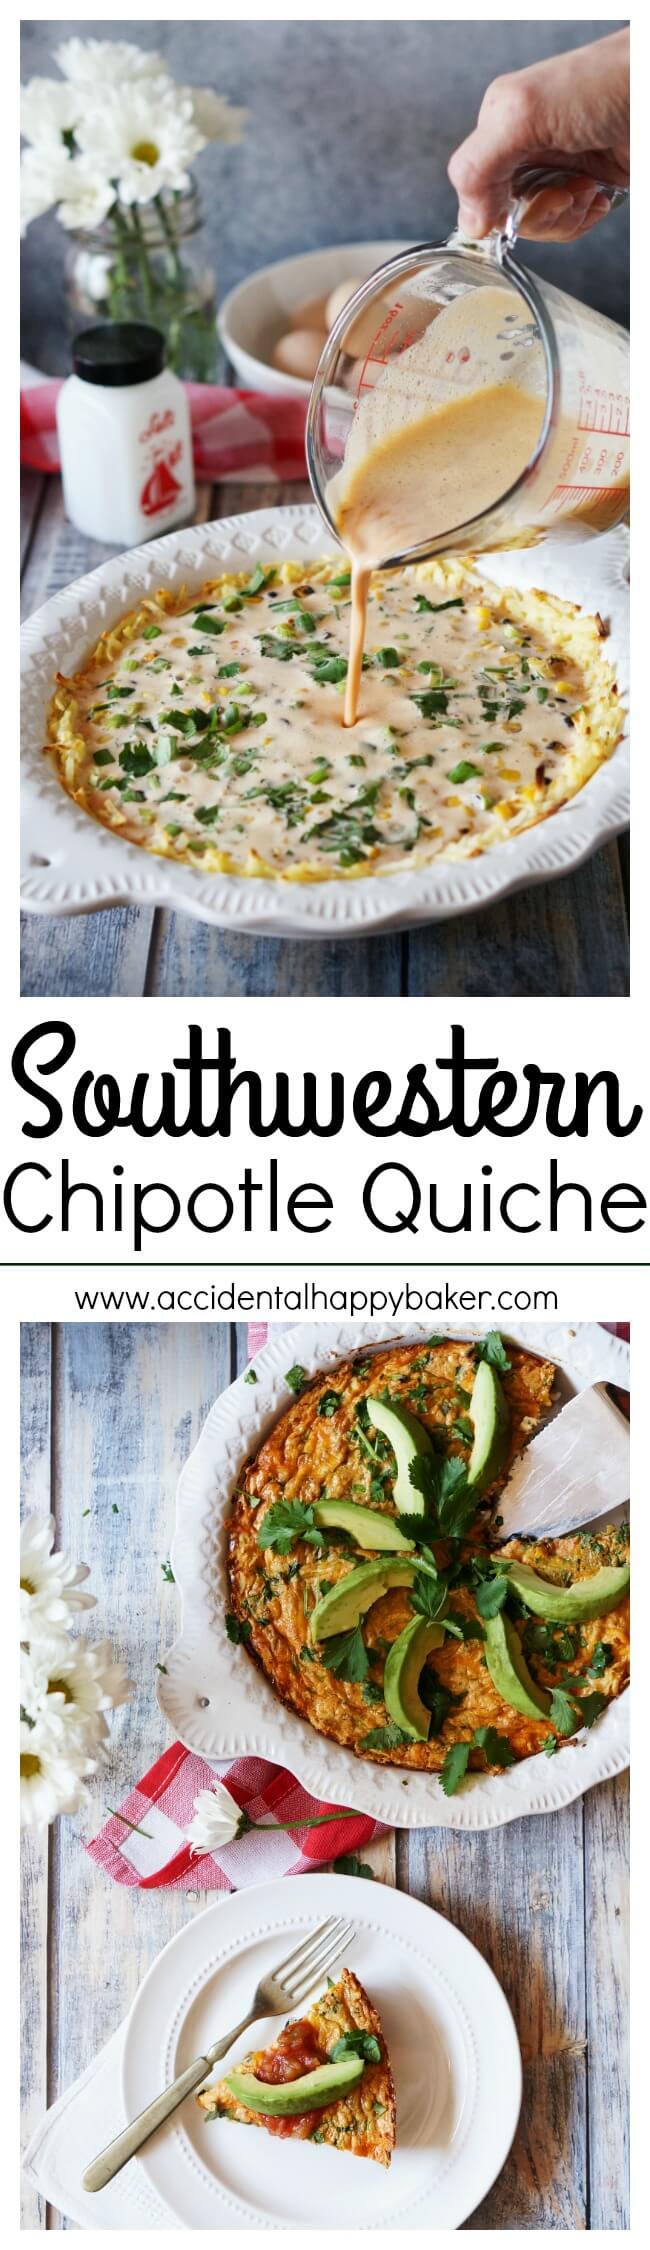 Spicy and smoky chipotles bring the flavor in this veggie loaded Southwestern Chipotle Quiche. Full of roasted corn, black beans, green onions, cheddar and a hashbrown potato crust. Recipe on www.accidentalhappybaker.com @AHBamy #ad #VivaLaMorena